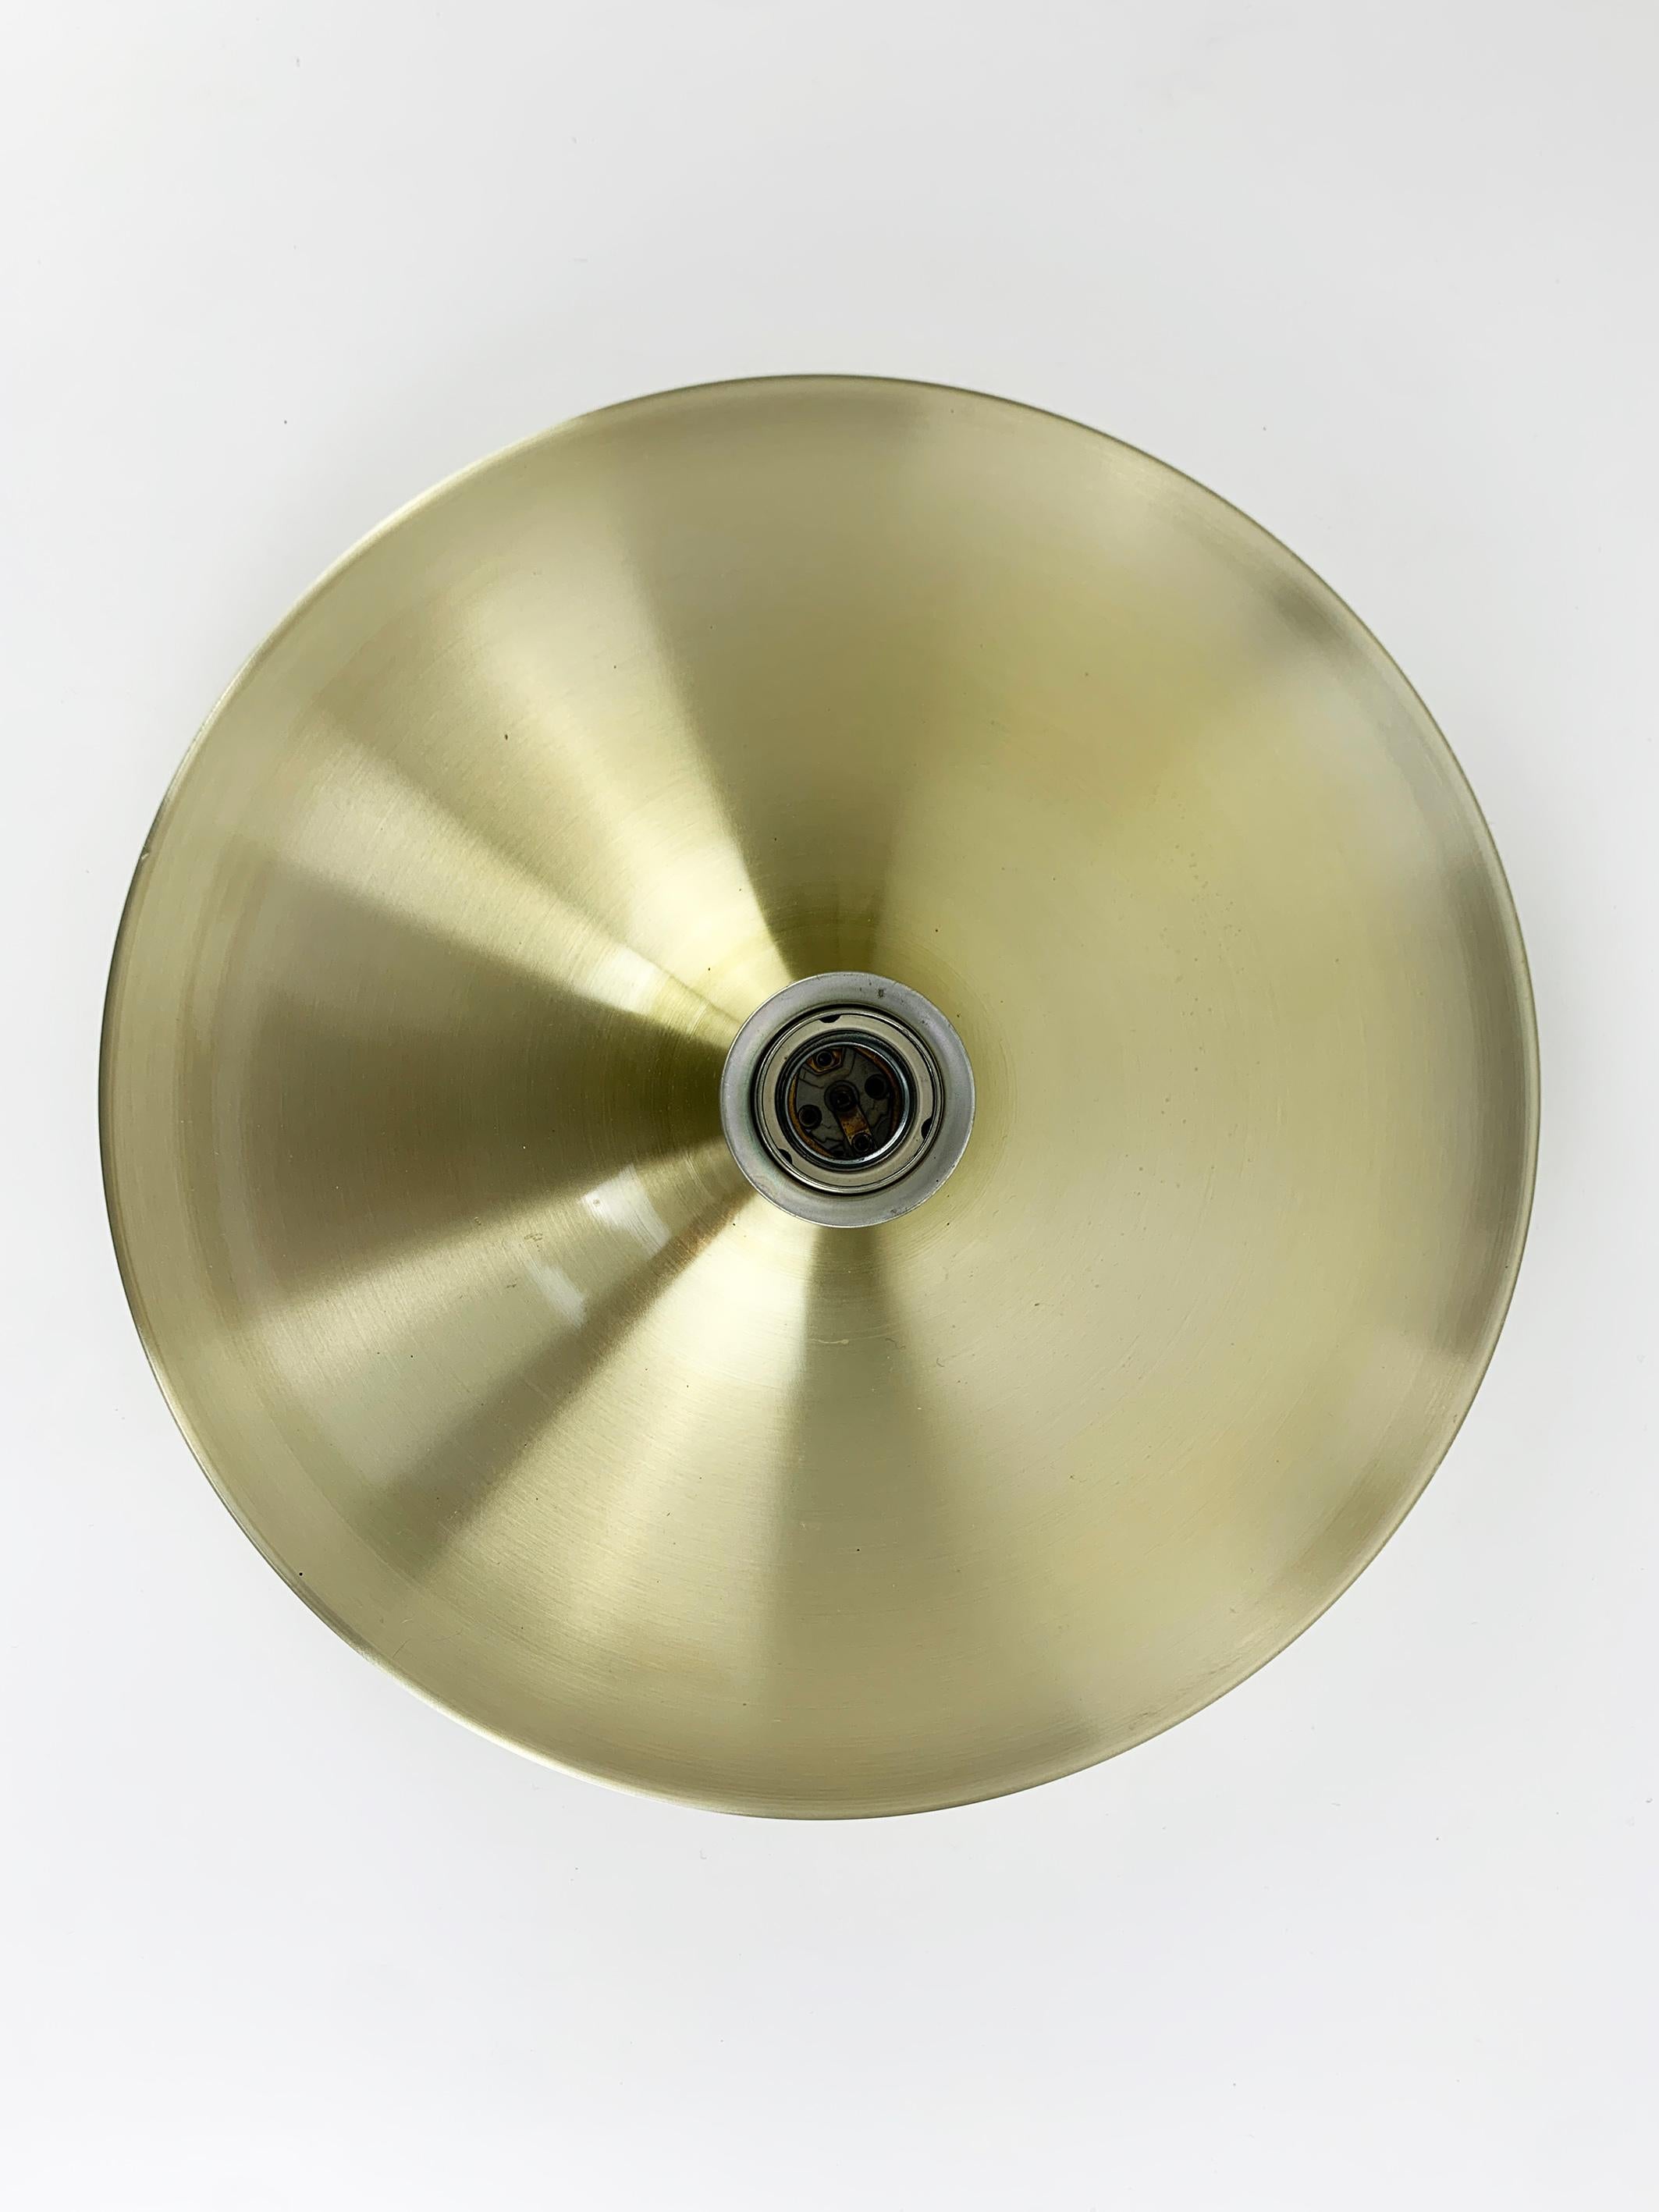 Charlotte Perriand Flush Sconce Gold Disc Wall Light, Germany, 1960s For Sale 1